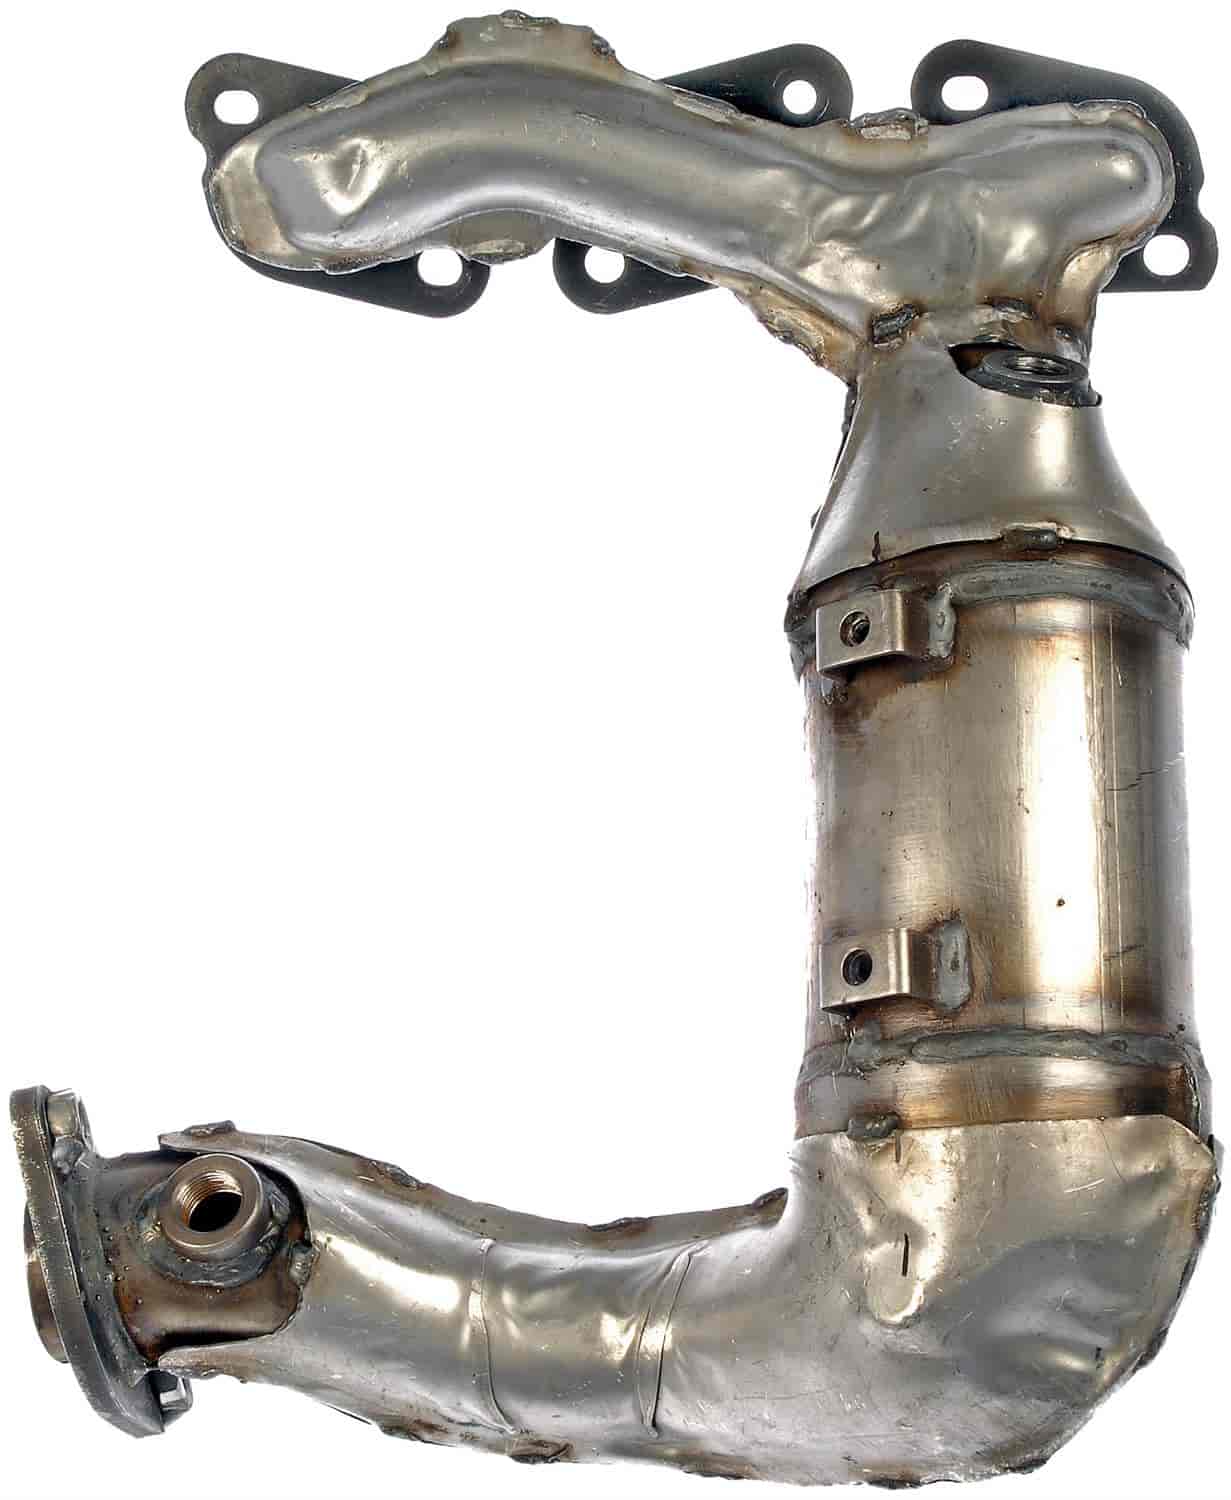 Manifold Converter - Carb Compliant - Legal Sale - NY-CA